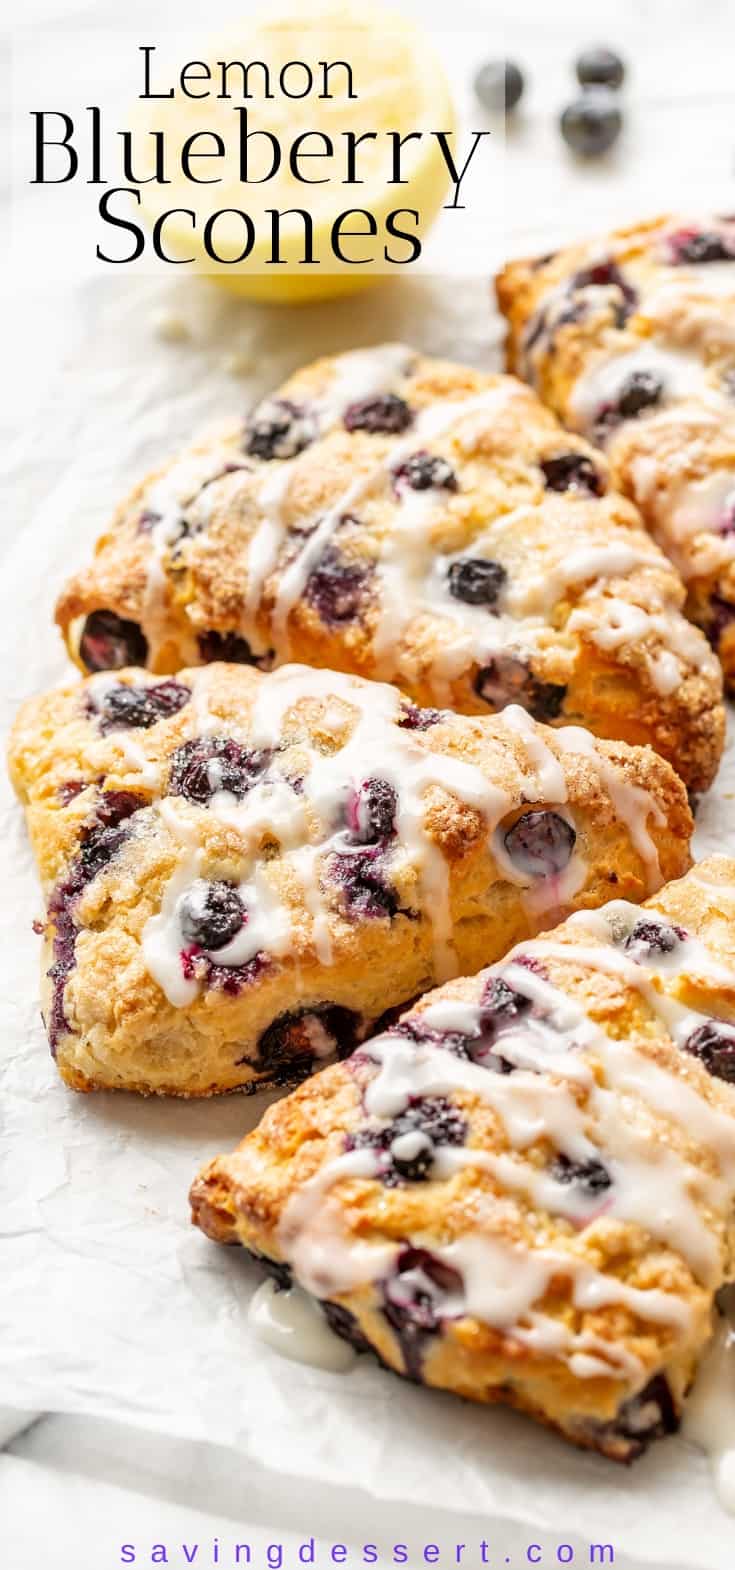 A side view of an array of lemon blueberry scones iced with a lemon drizzle